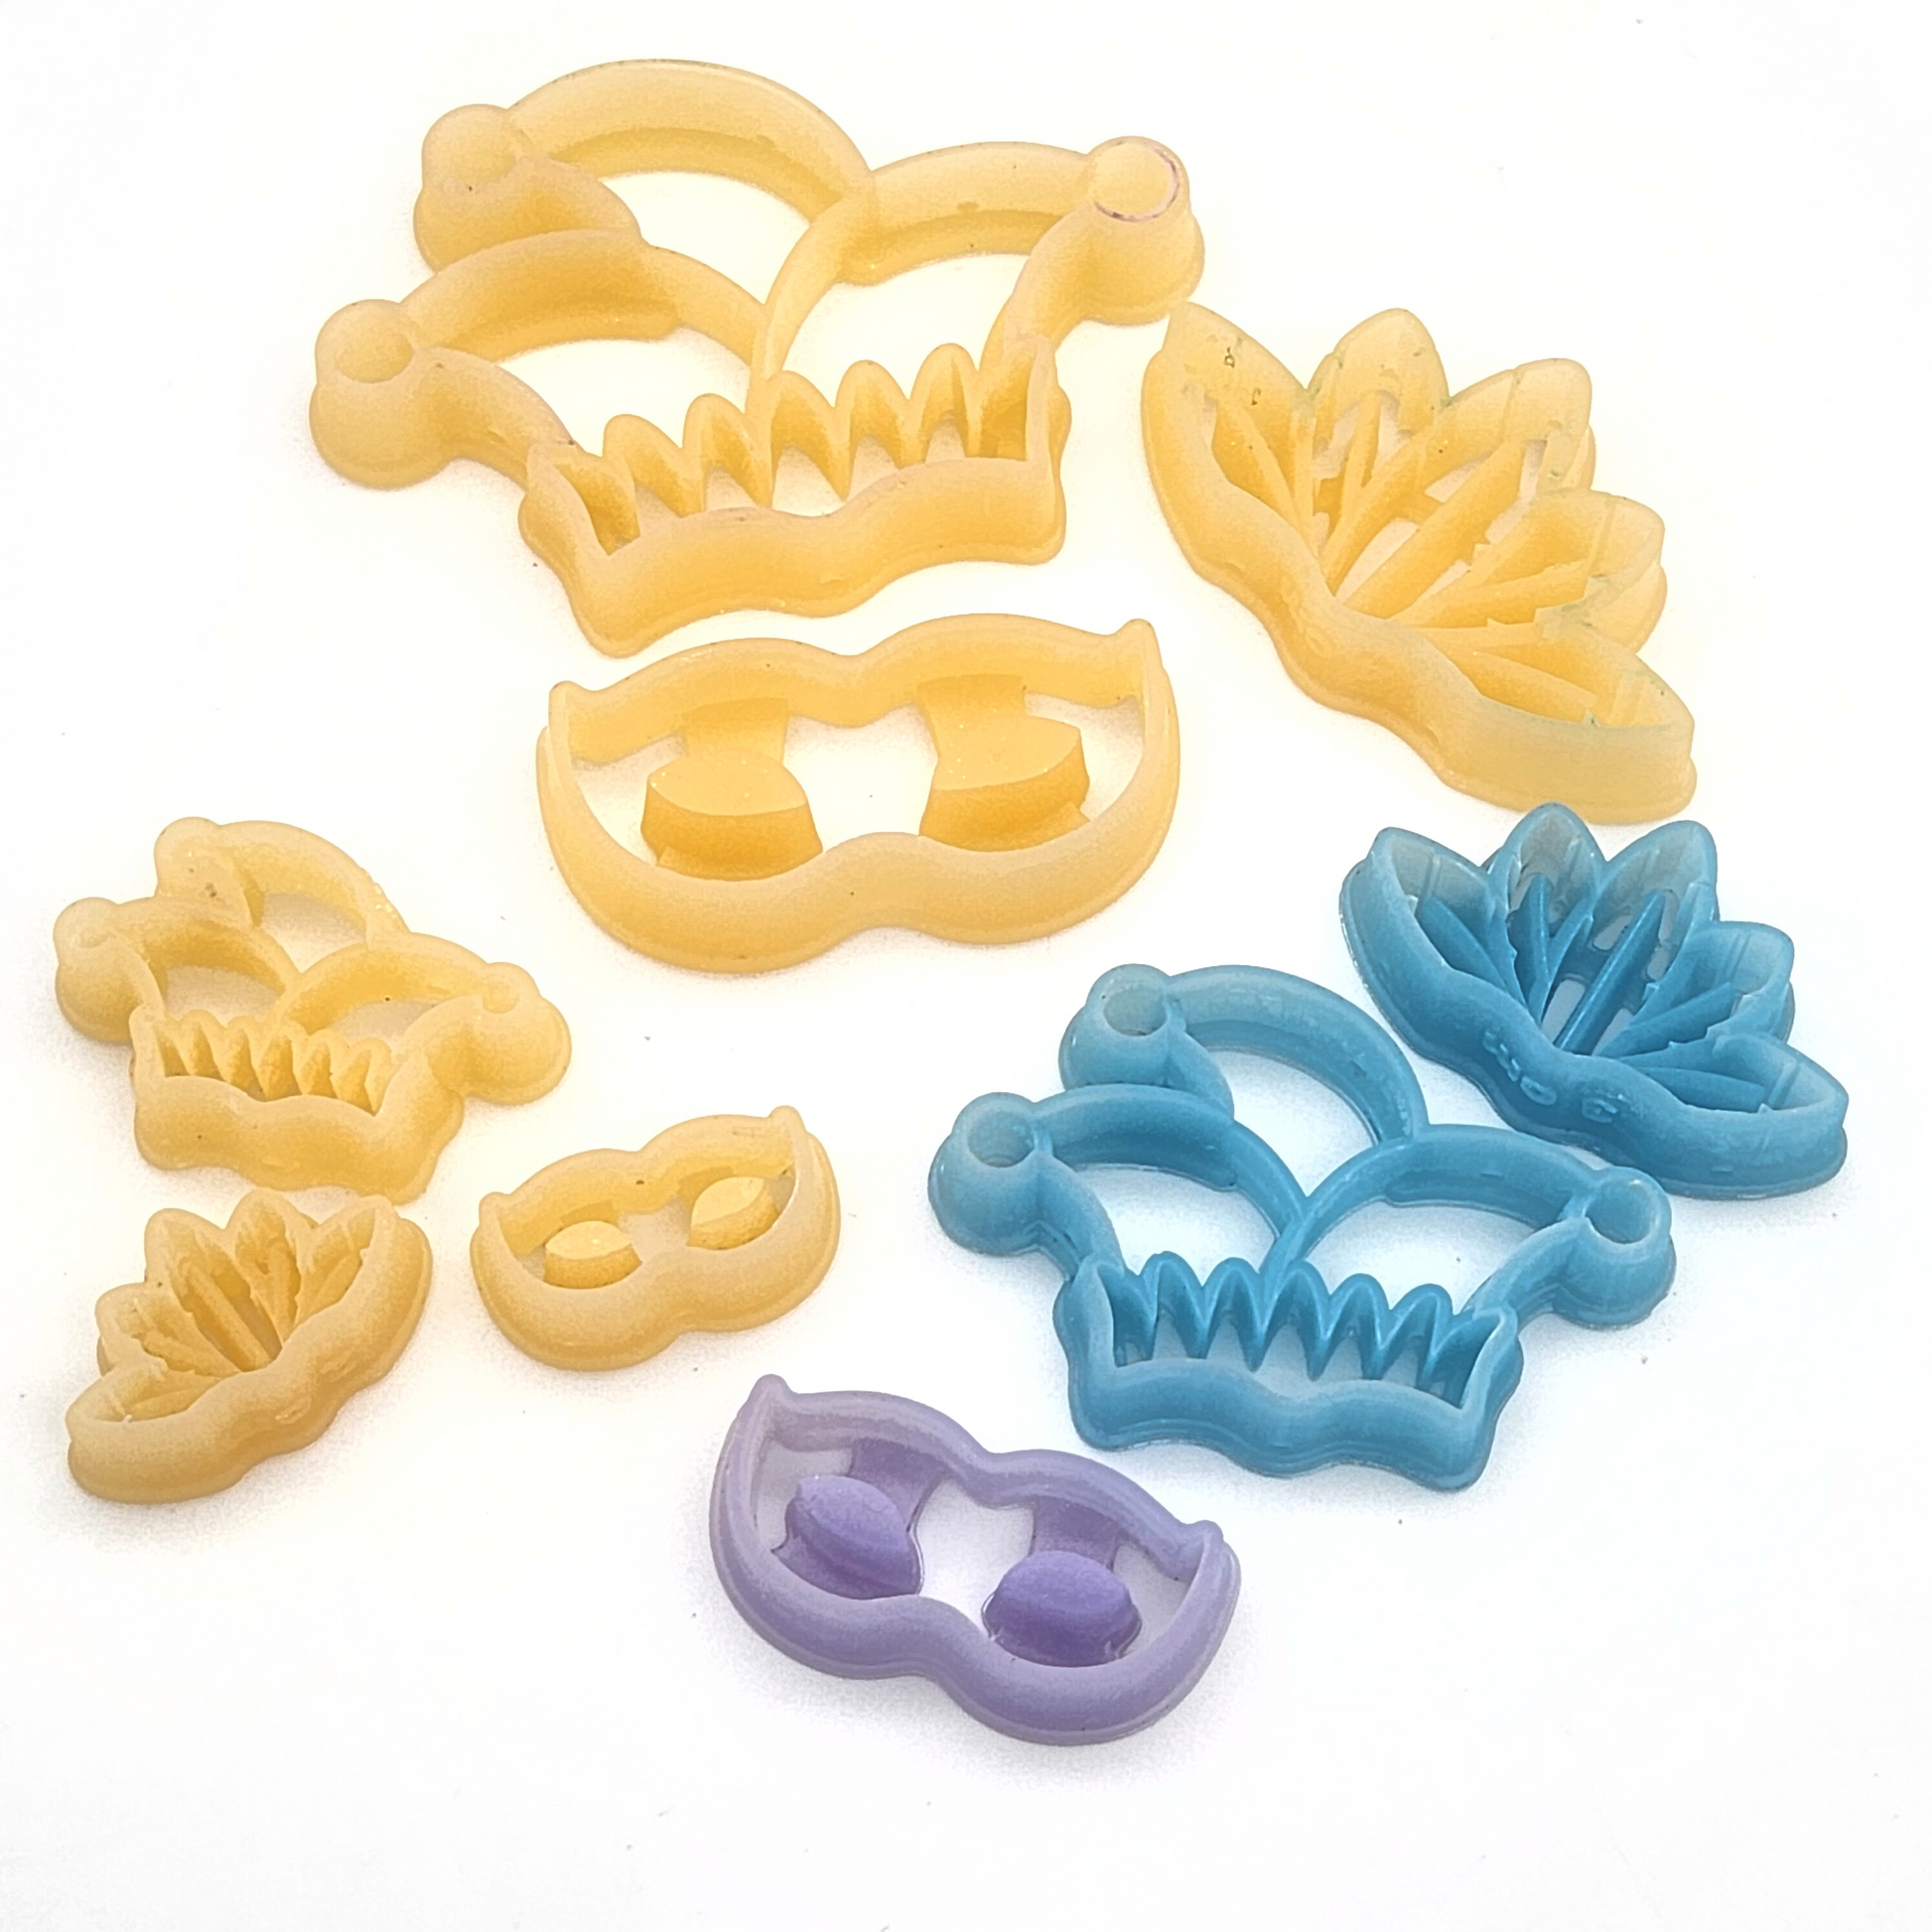 Polymer Clay Cutter set of 6, Donut Clay Cutter